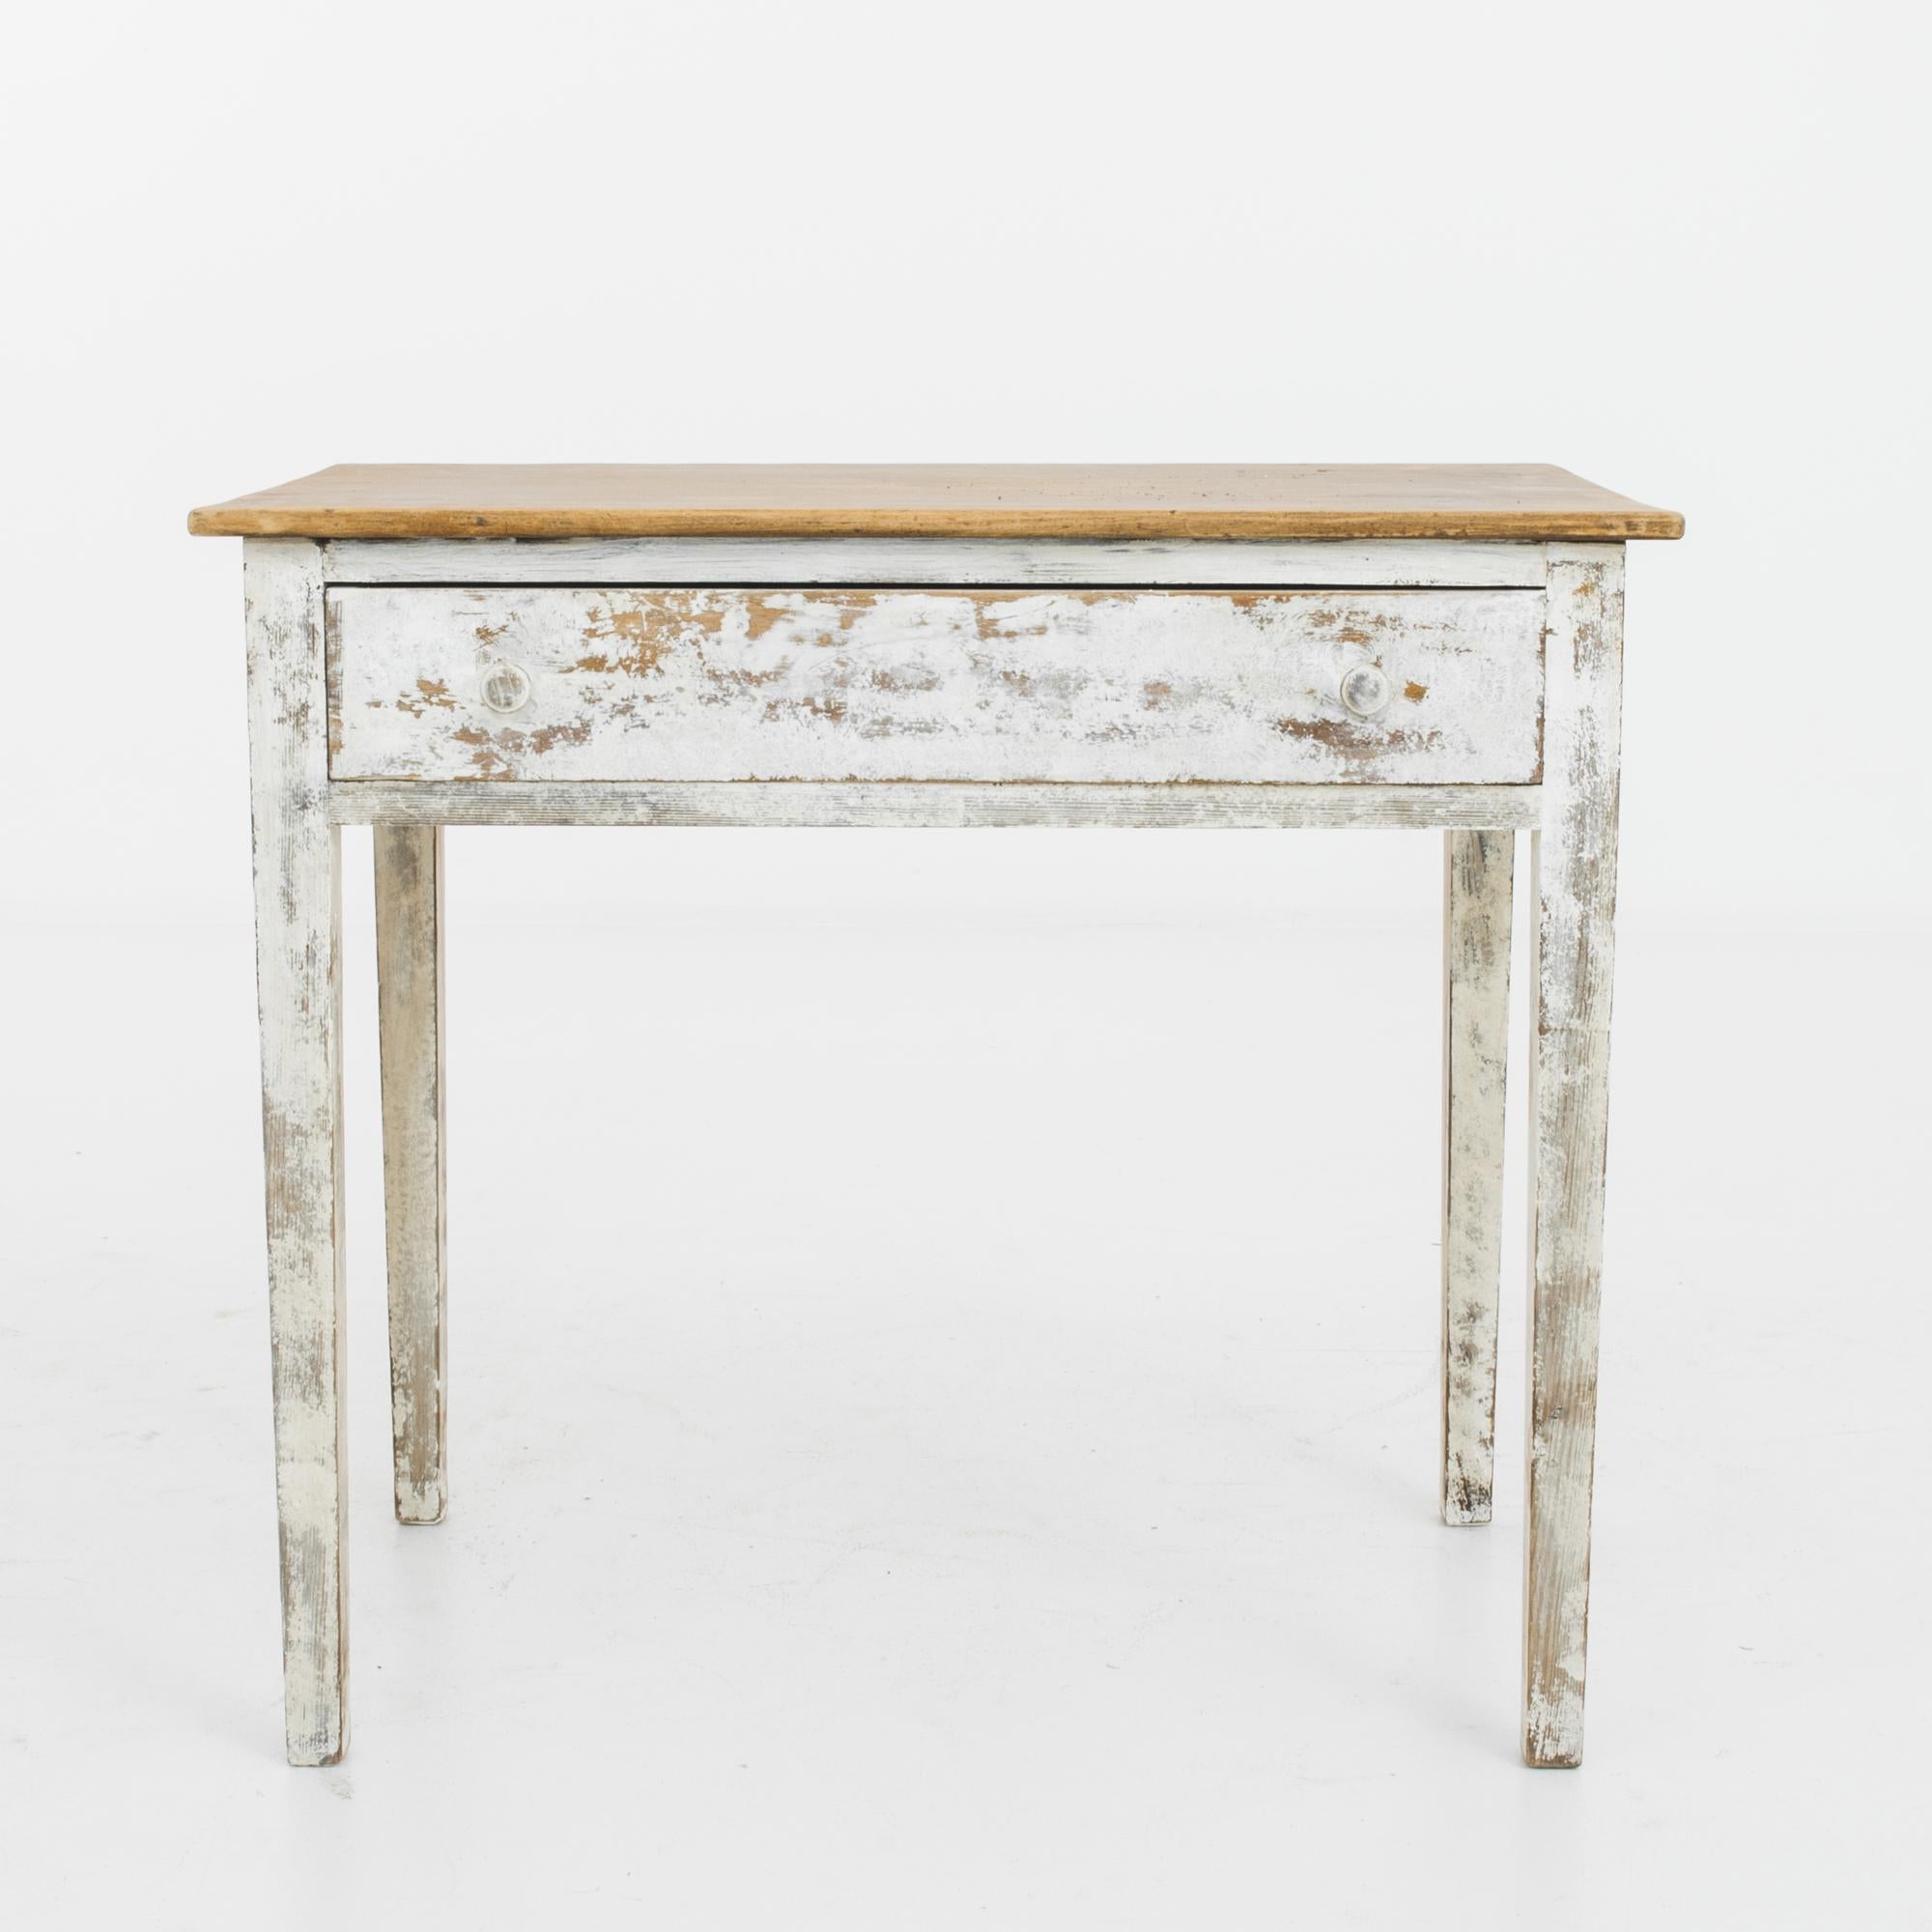 This antique wooden table was made in Belgium. It features a wide drawer with circular pulls and four legs that display a slight taper. A captivating rustic piece with its distressed white frame and the time-worn patina of the tabletop.